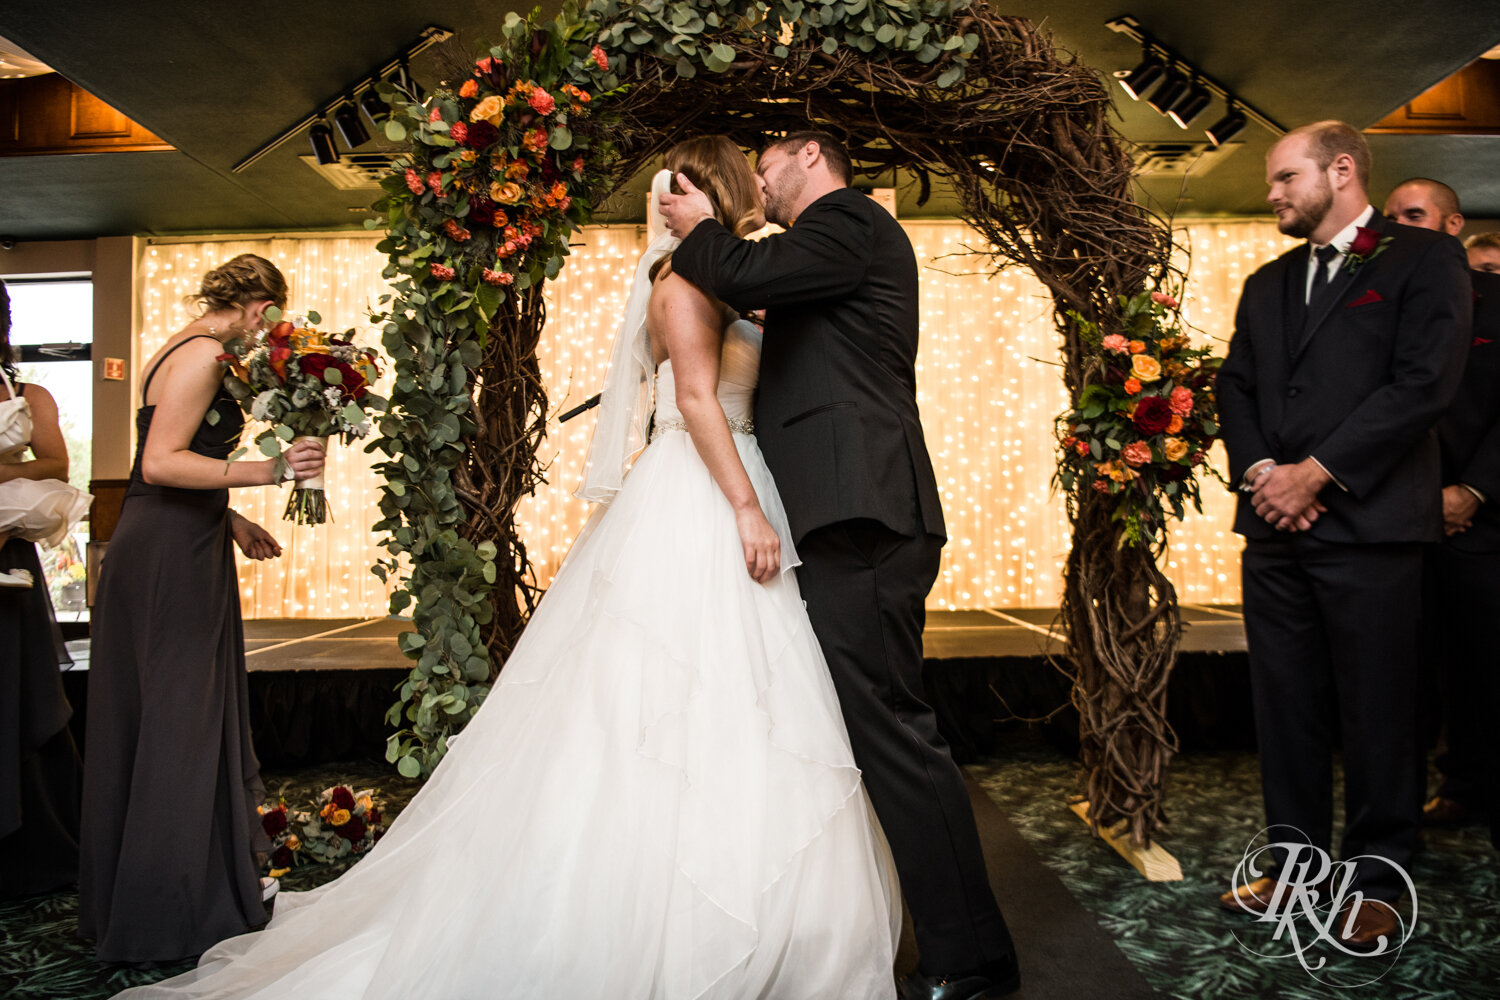 Bride and groom kiss at indoor wedding ceremony at Rockwoods in Otsego, Minnesota.